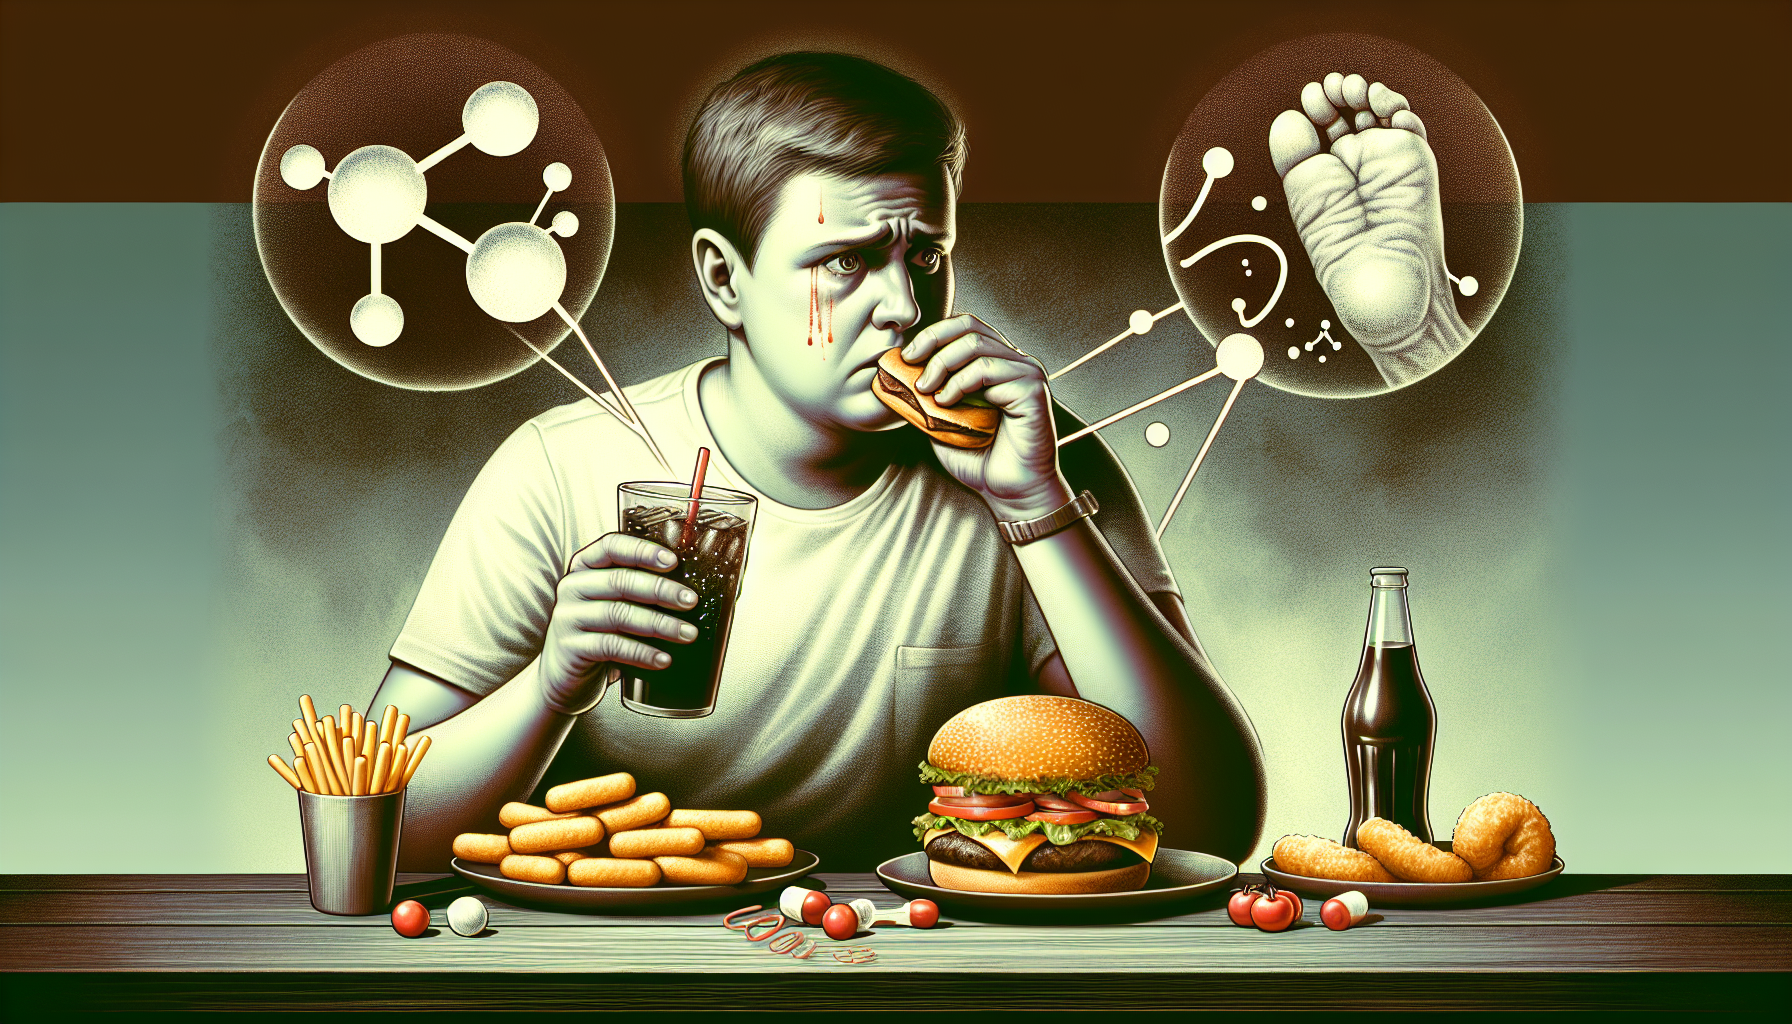 Illustration of a person with health concerns while on a dirty bulk diet